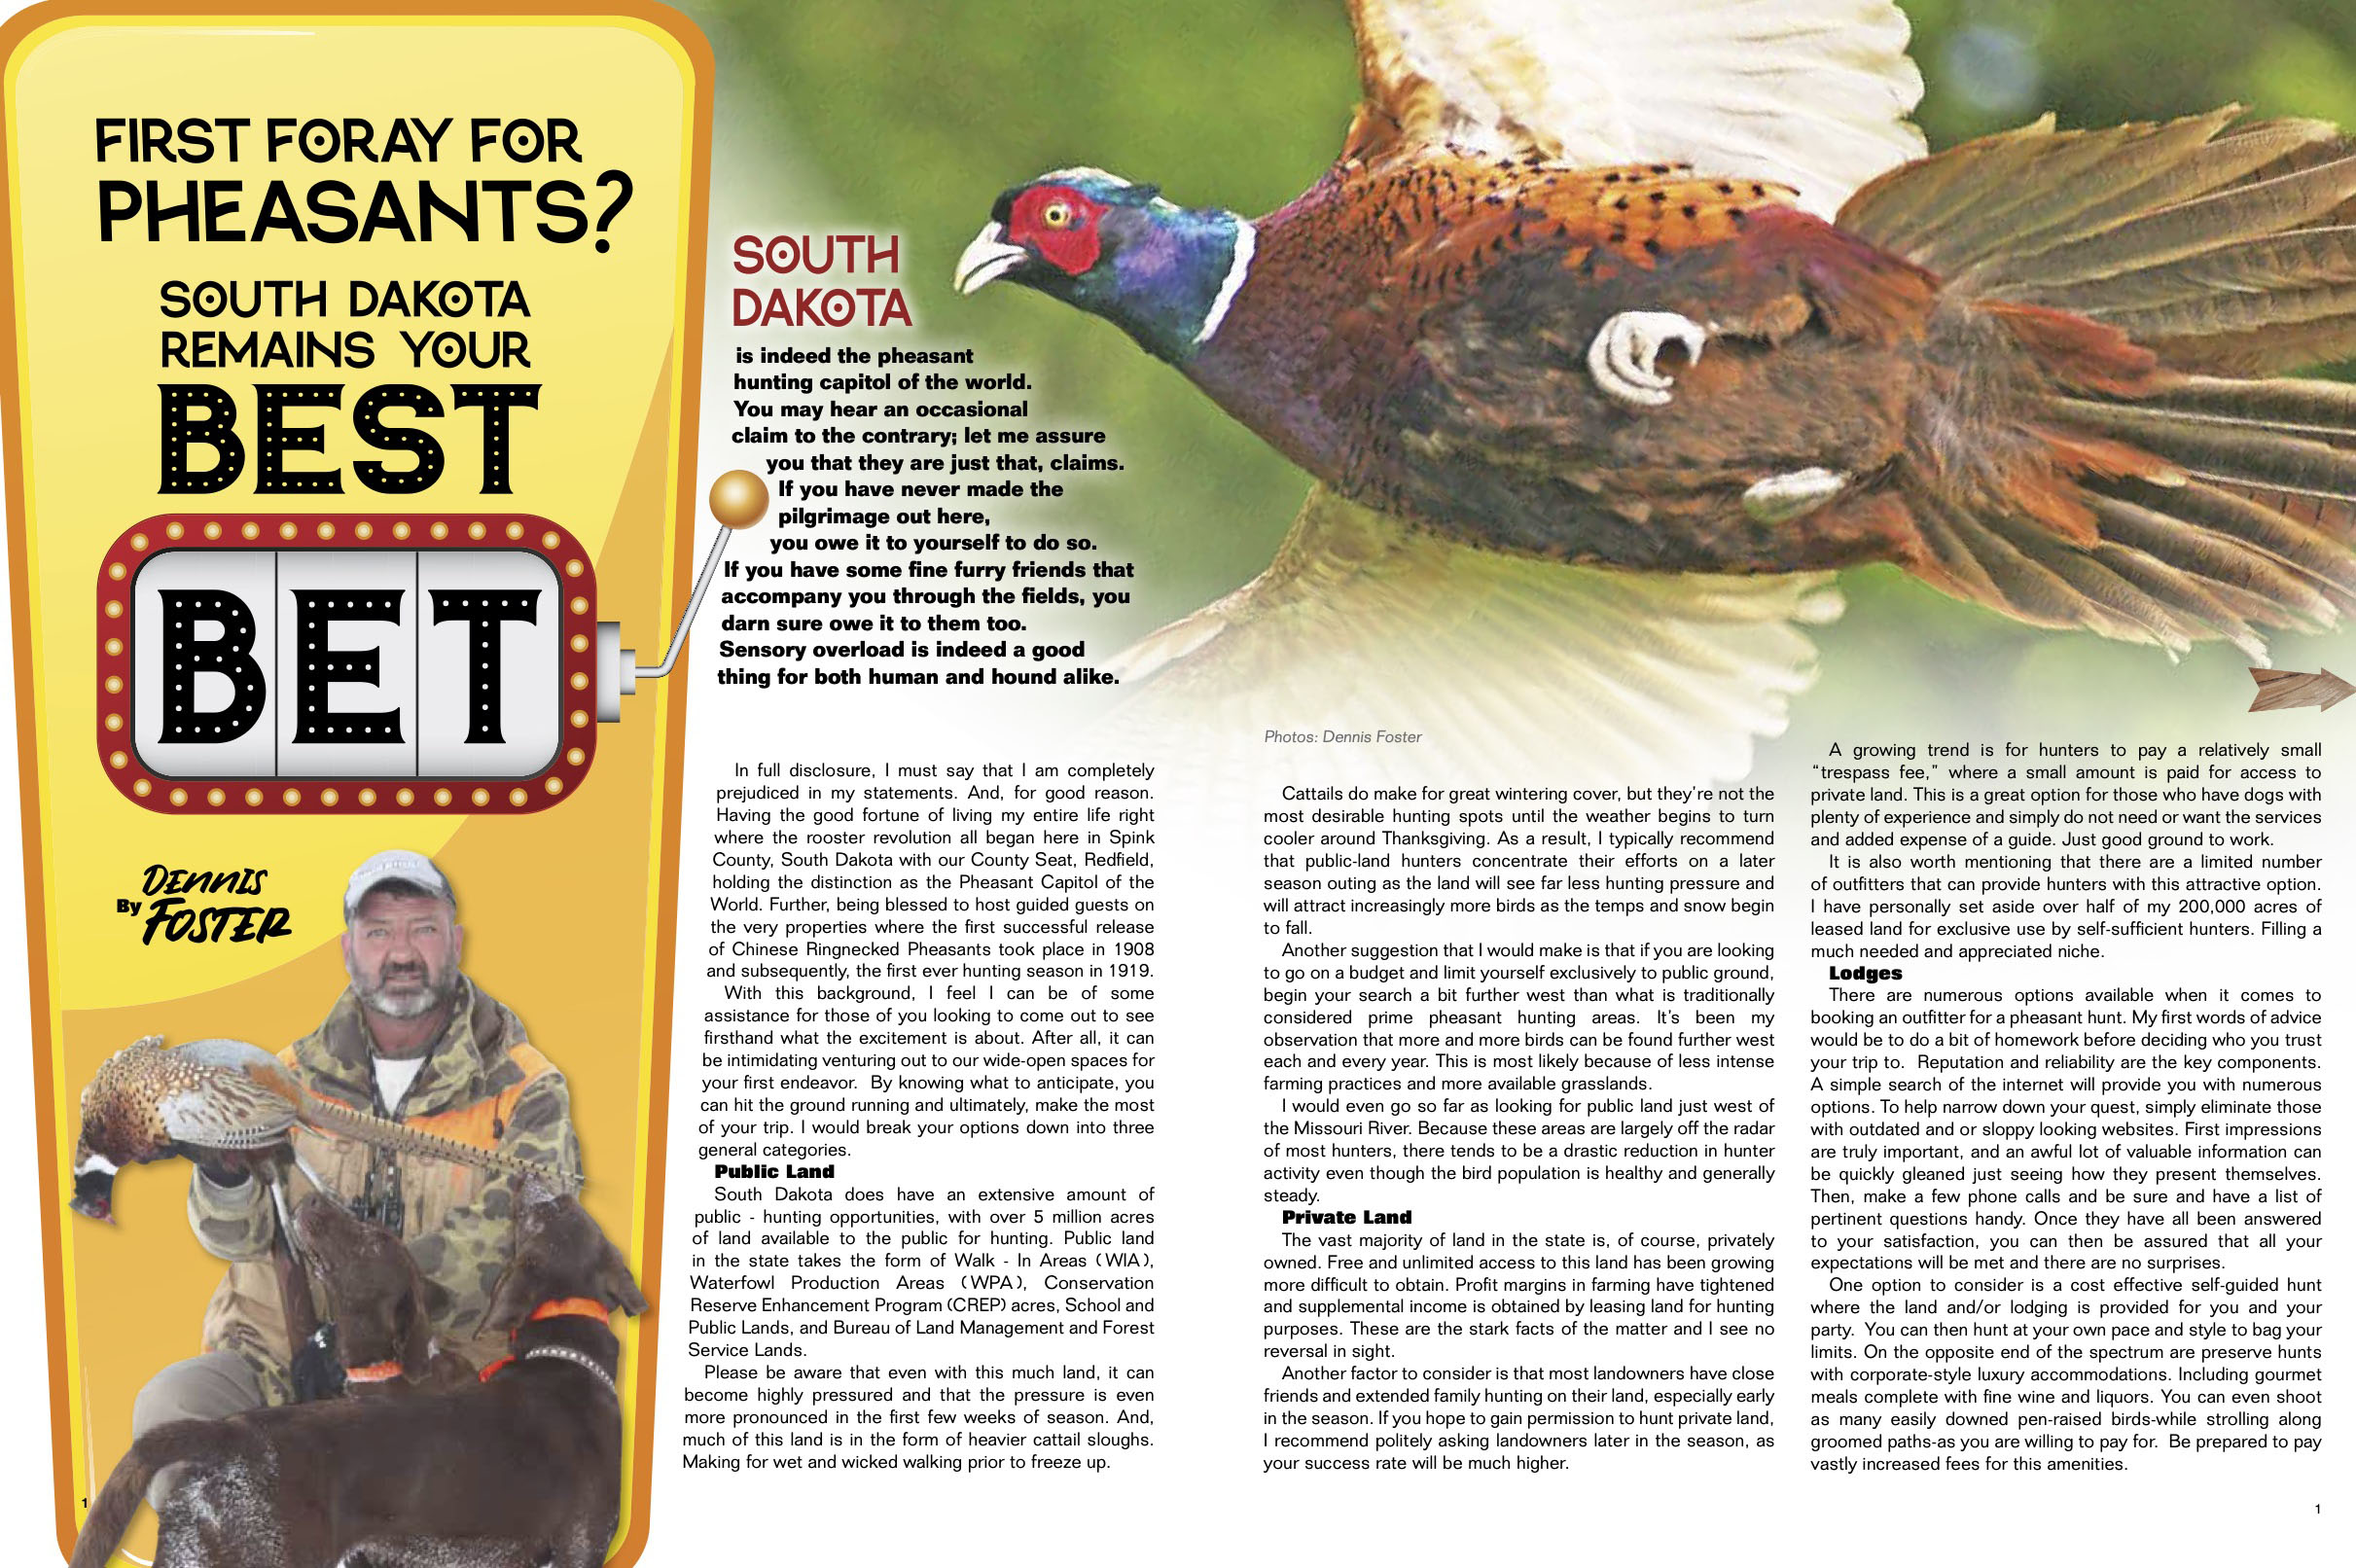 First Foray For Pheasants? South Dakota Remains Your Best Bet